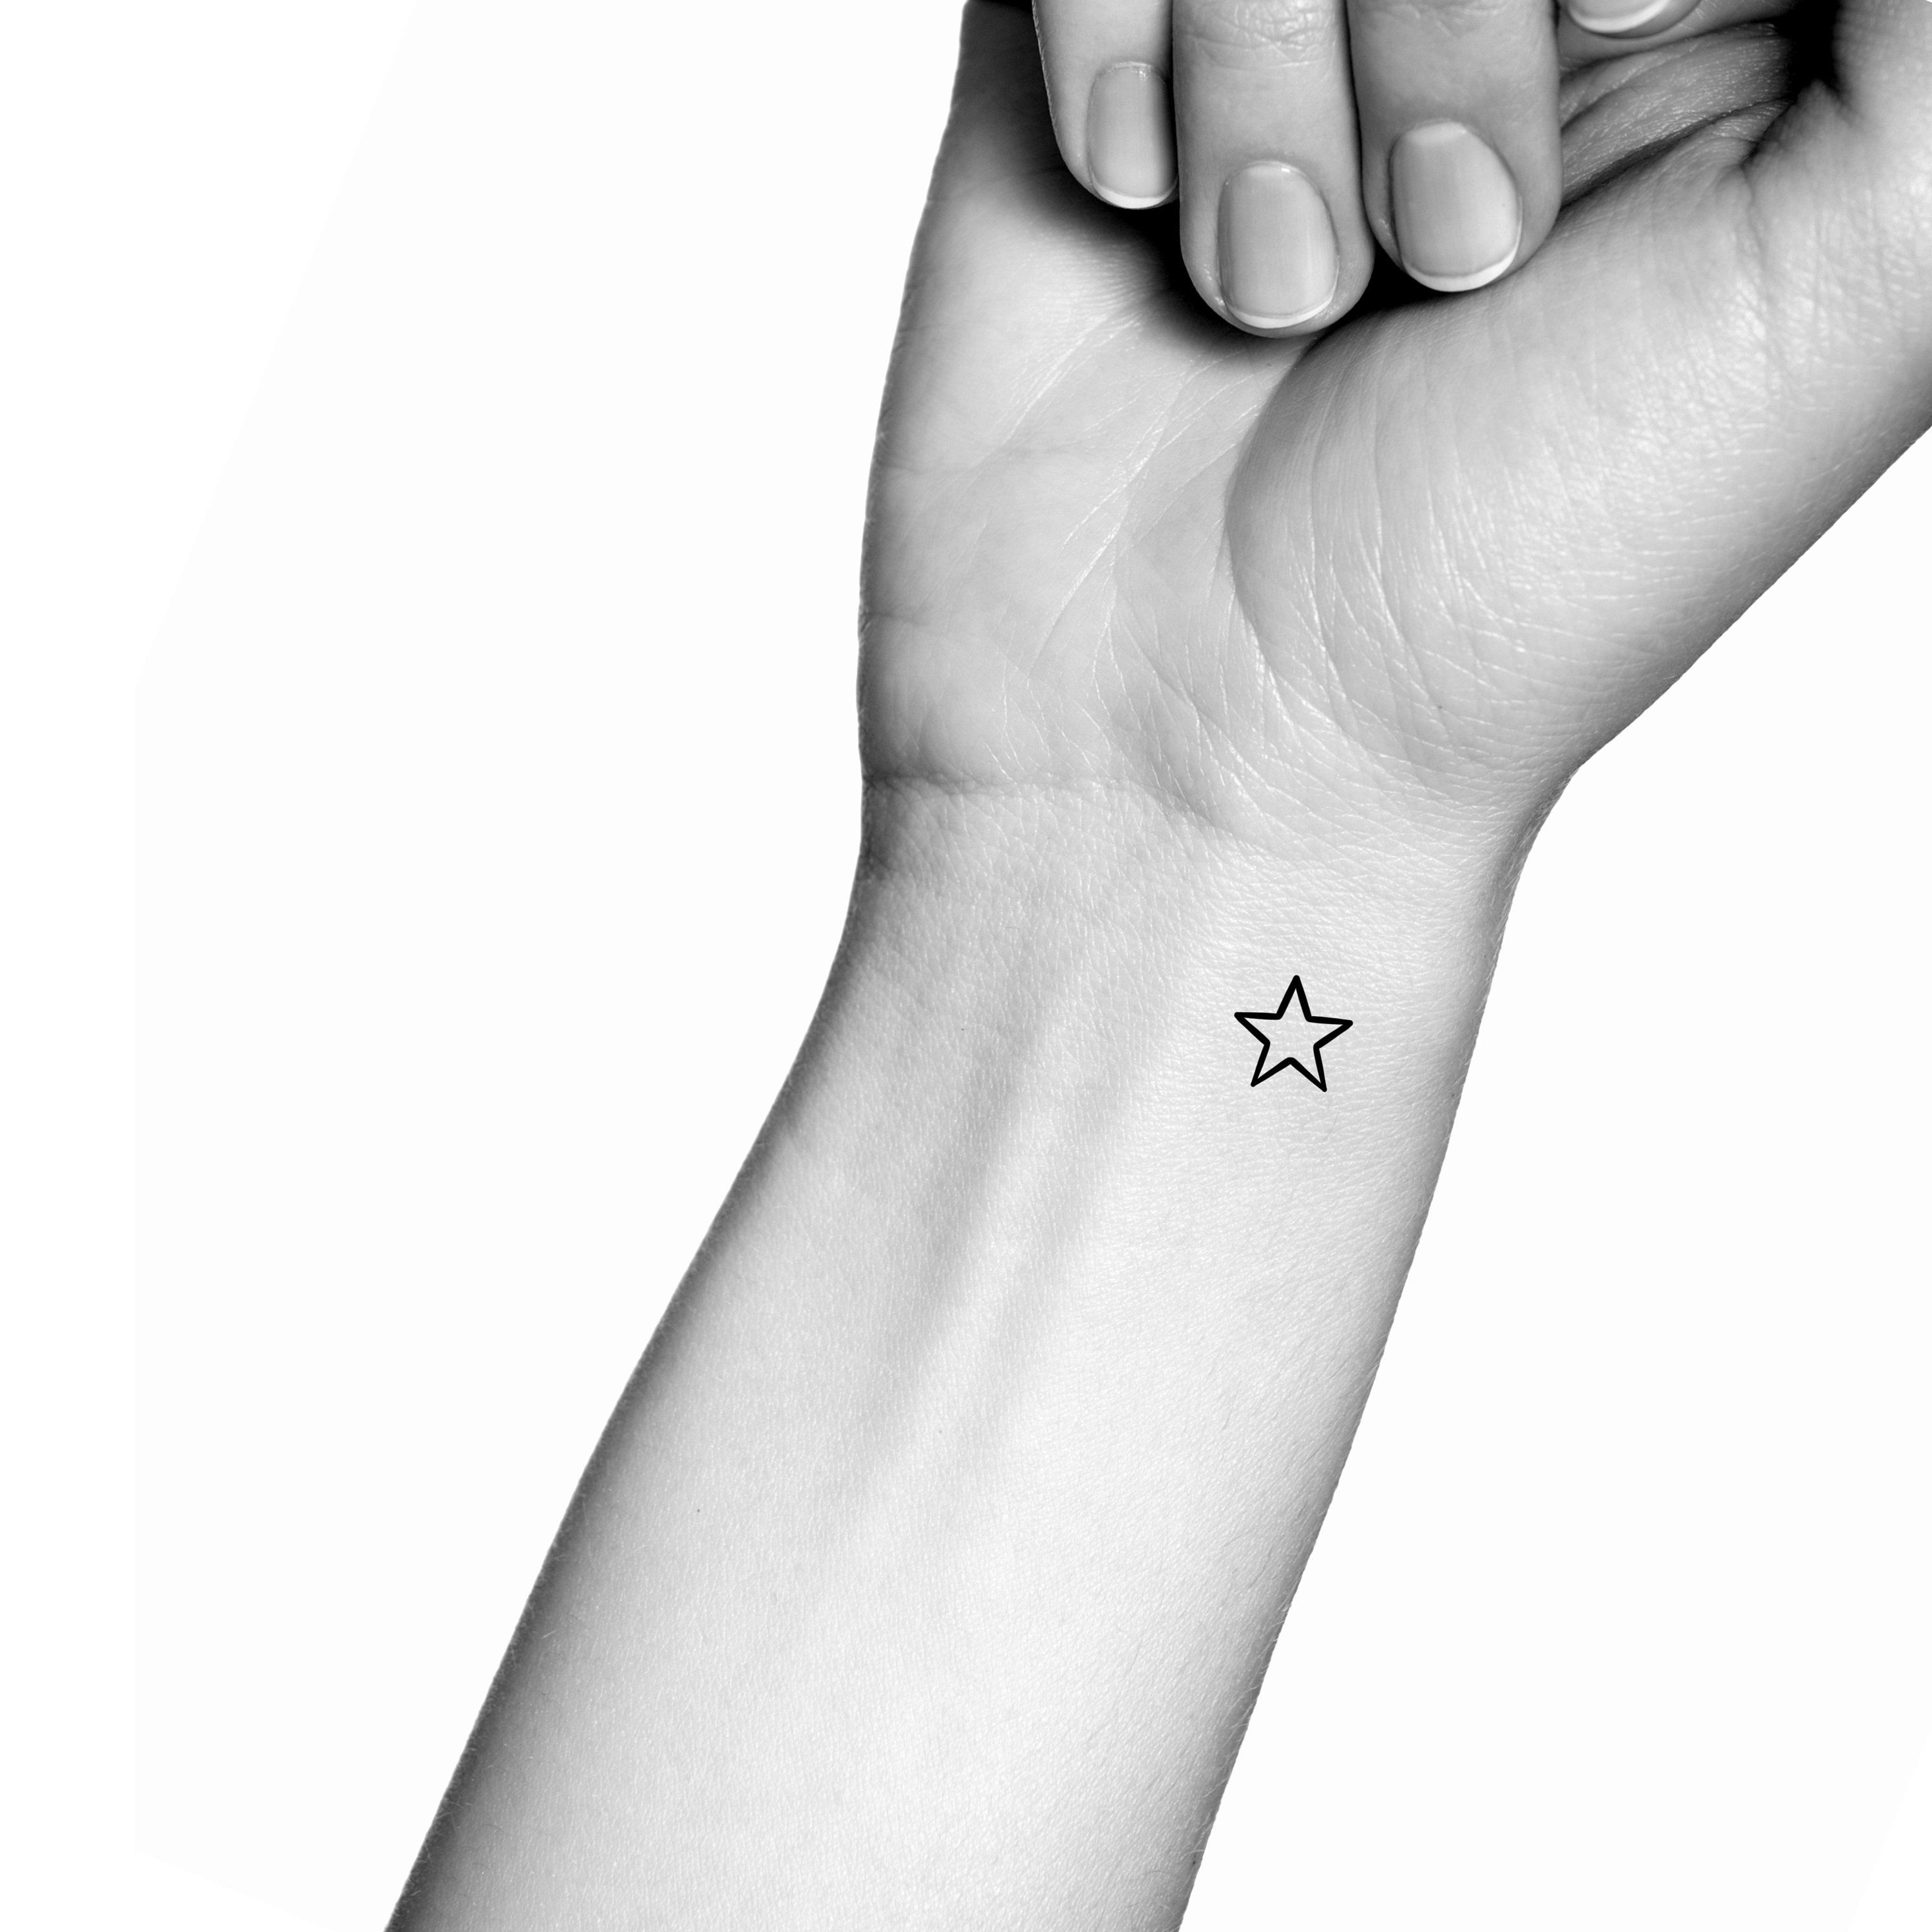 Discover 72+ star tattoo temporary - in.cdgdbentre